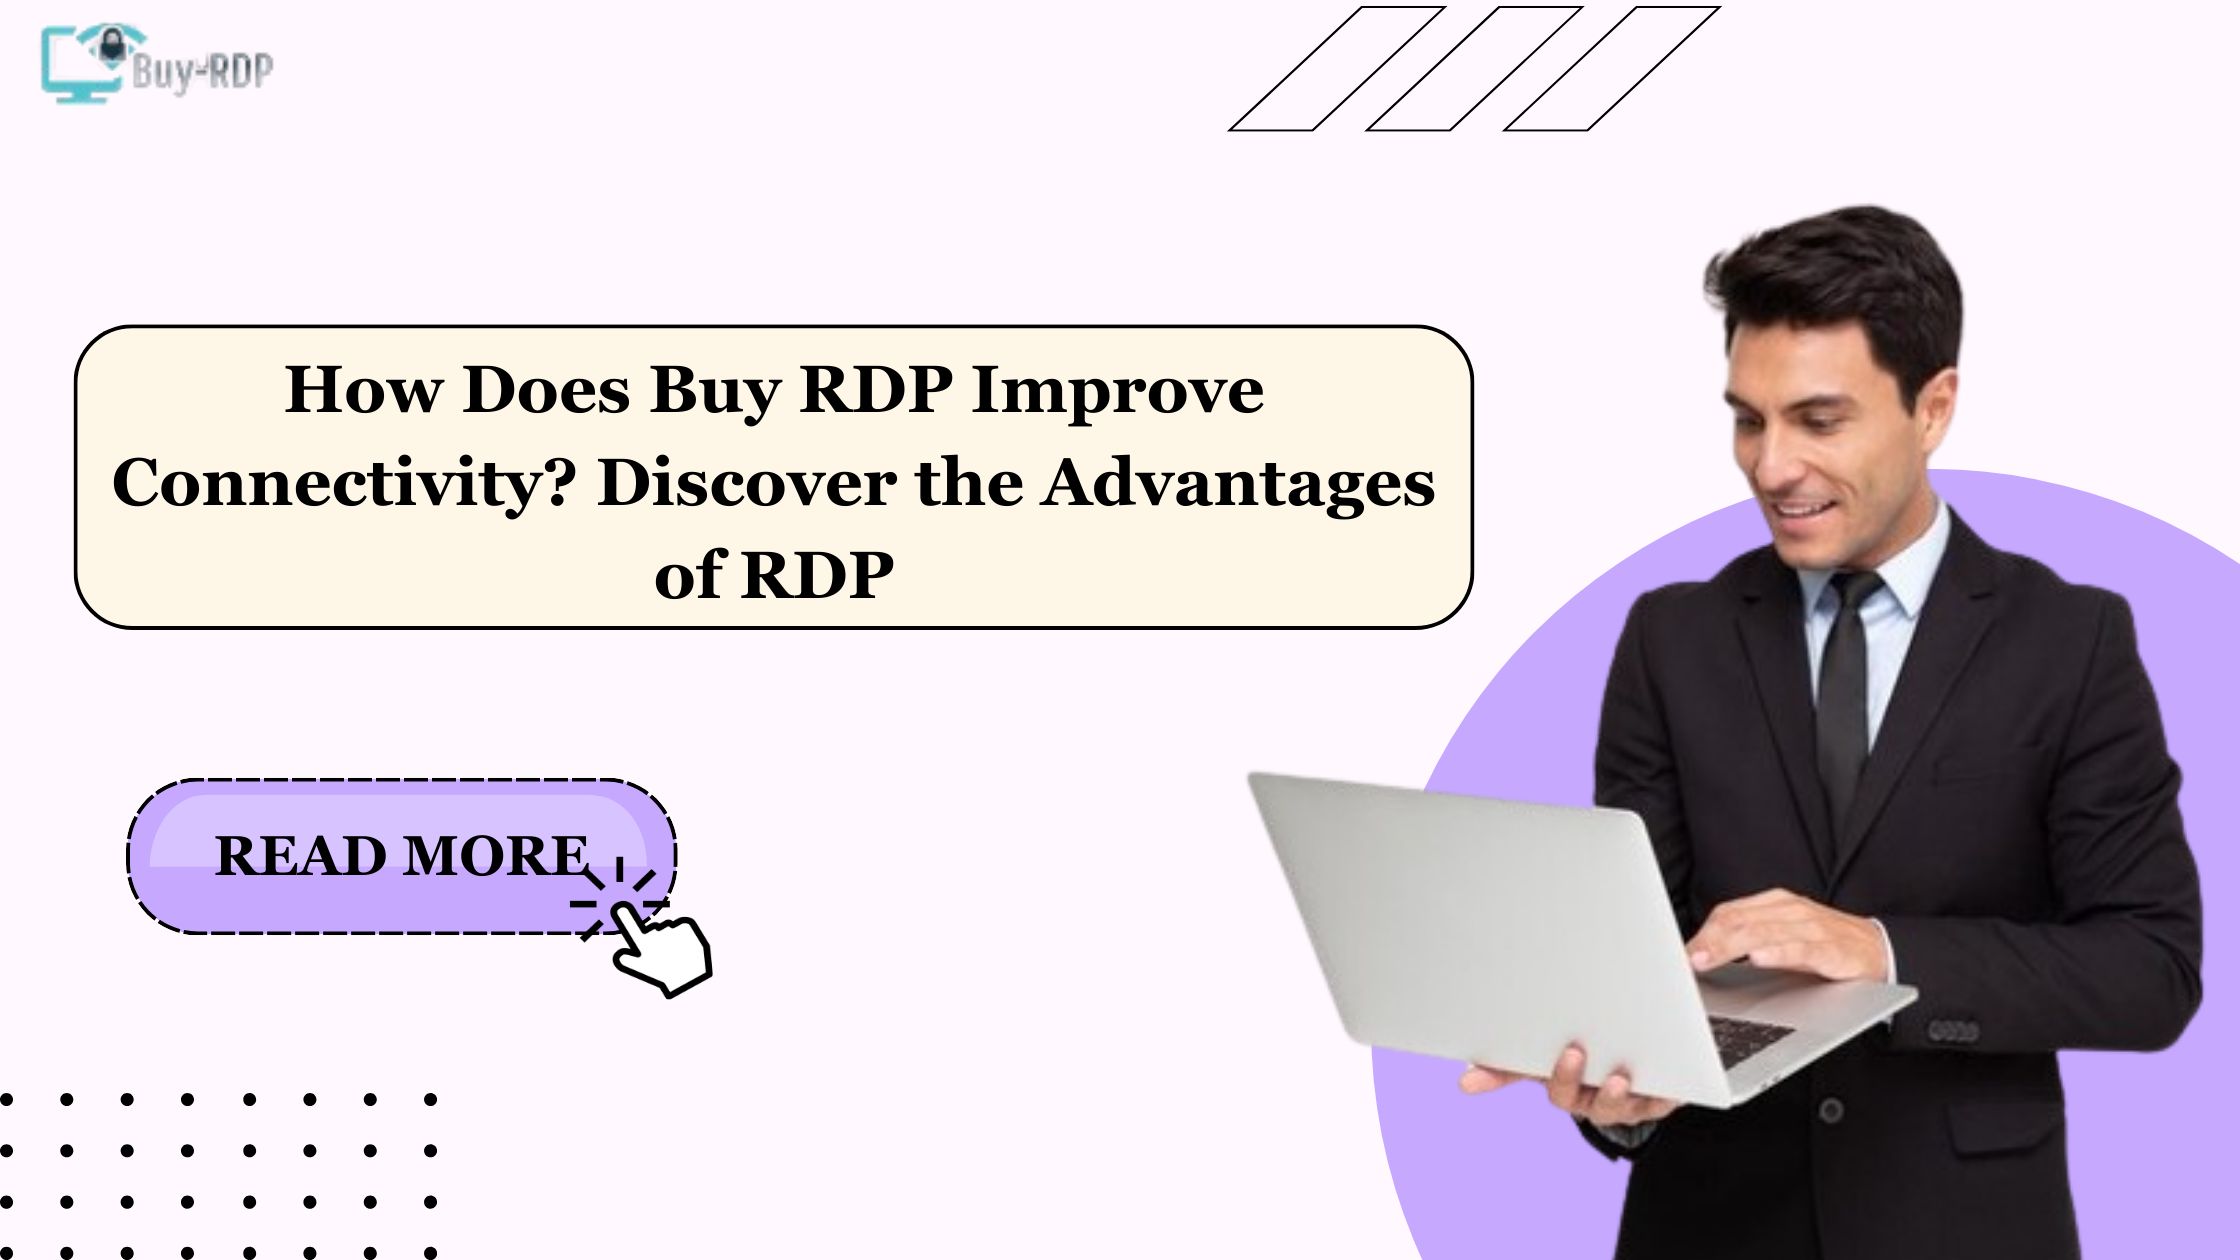 How Does Buy RDP Improve Connectivity Discover the Advantages of RDP